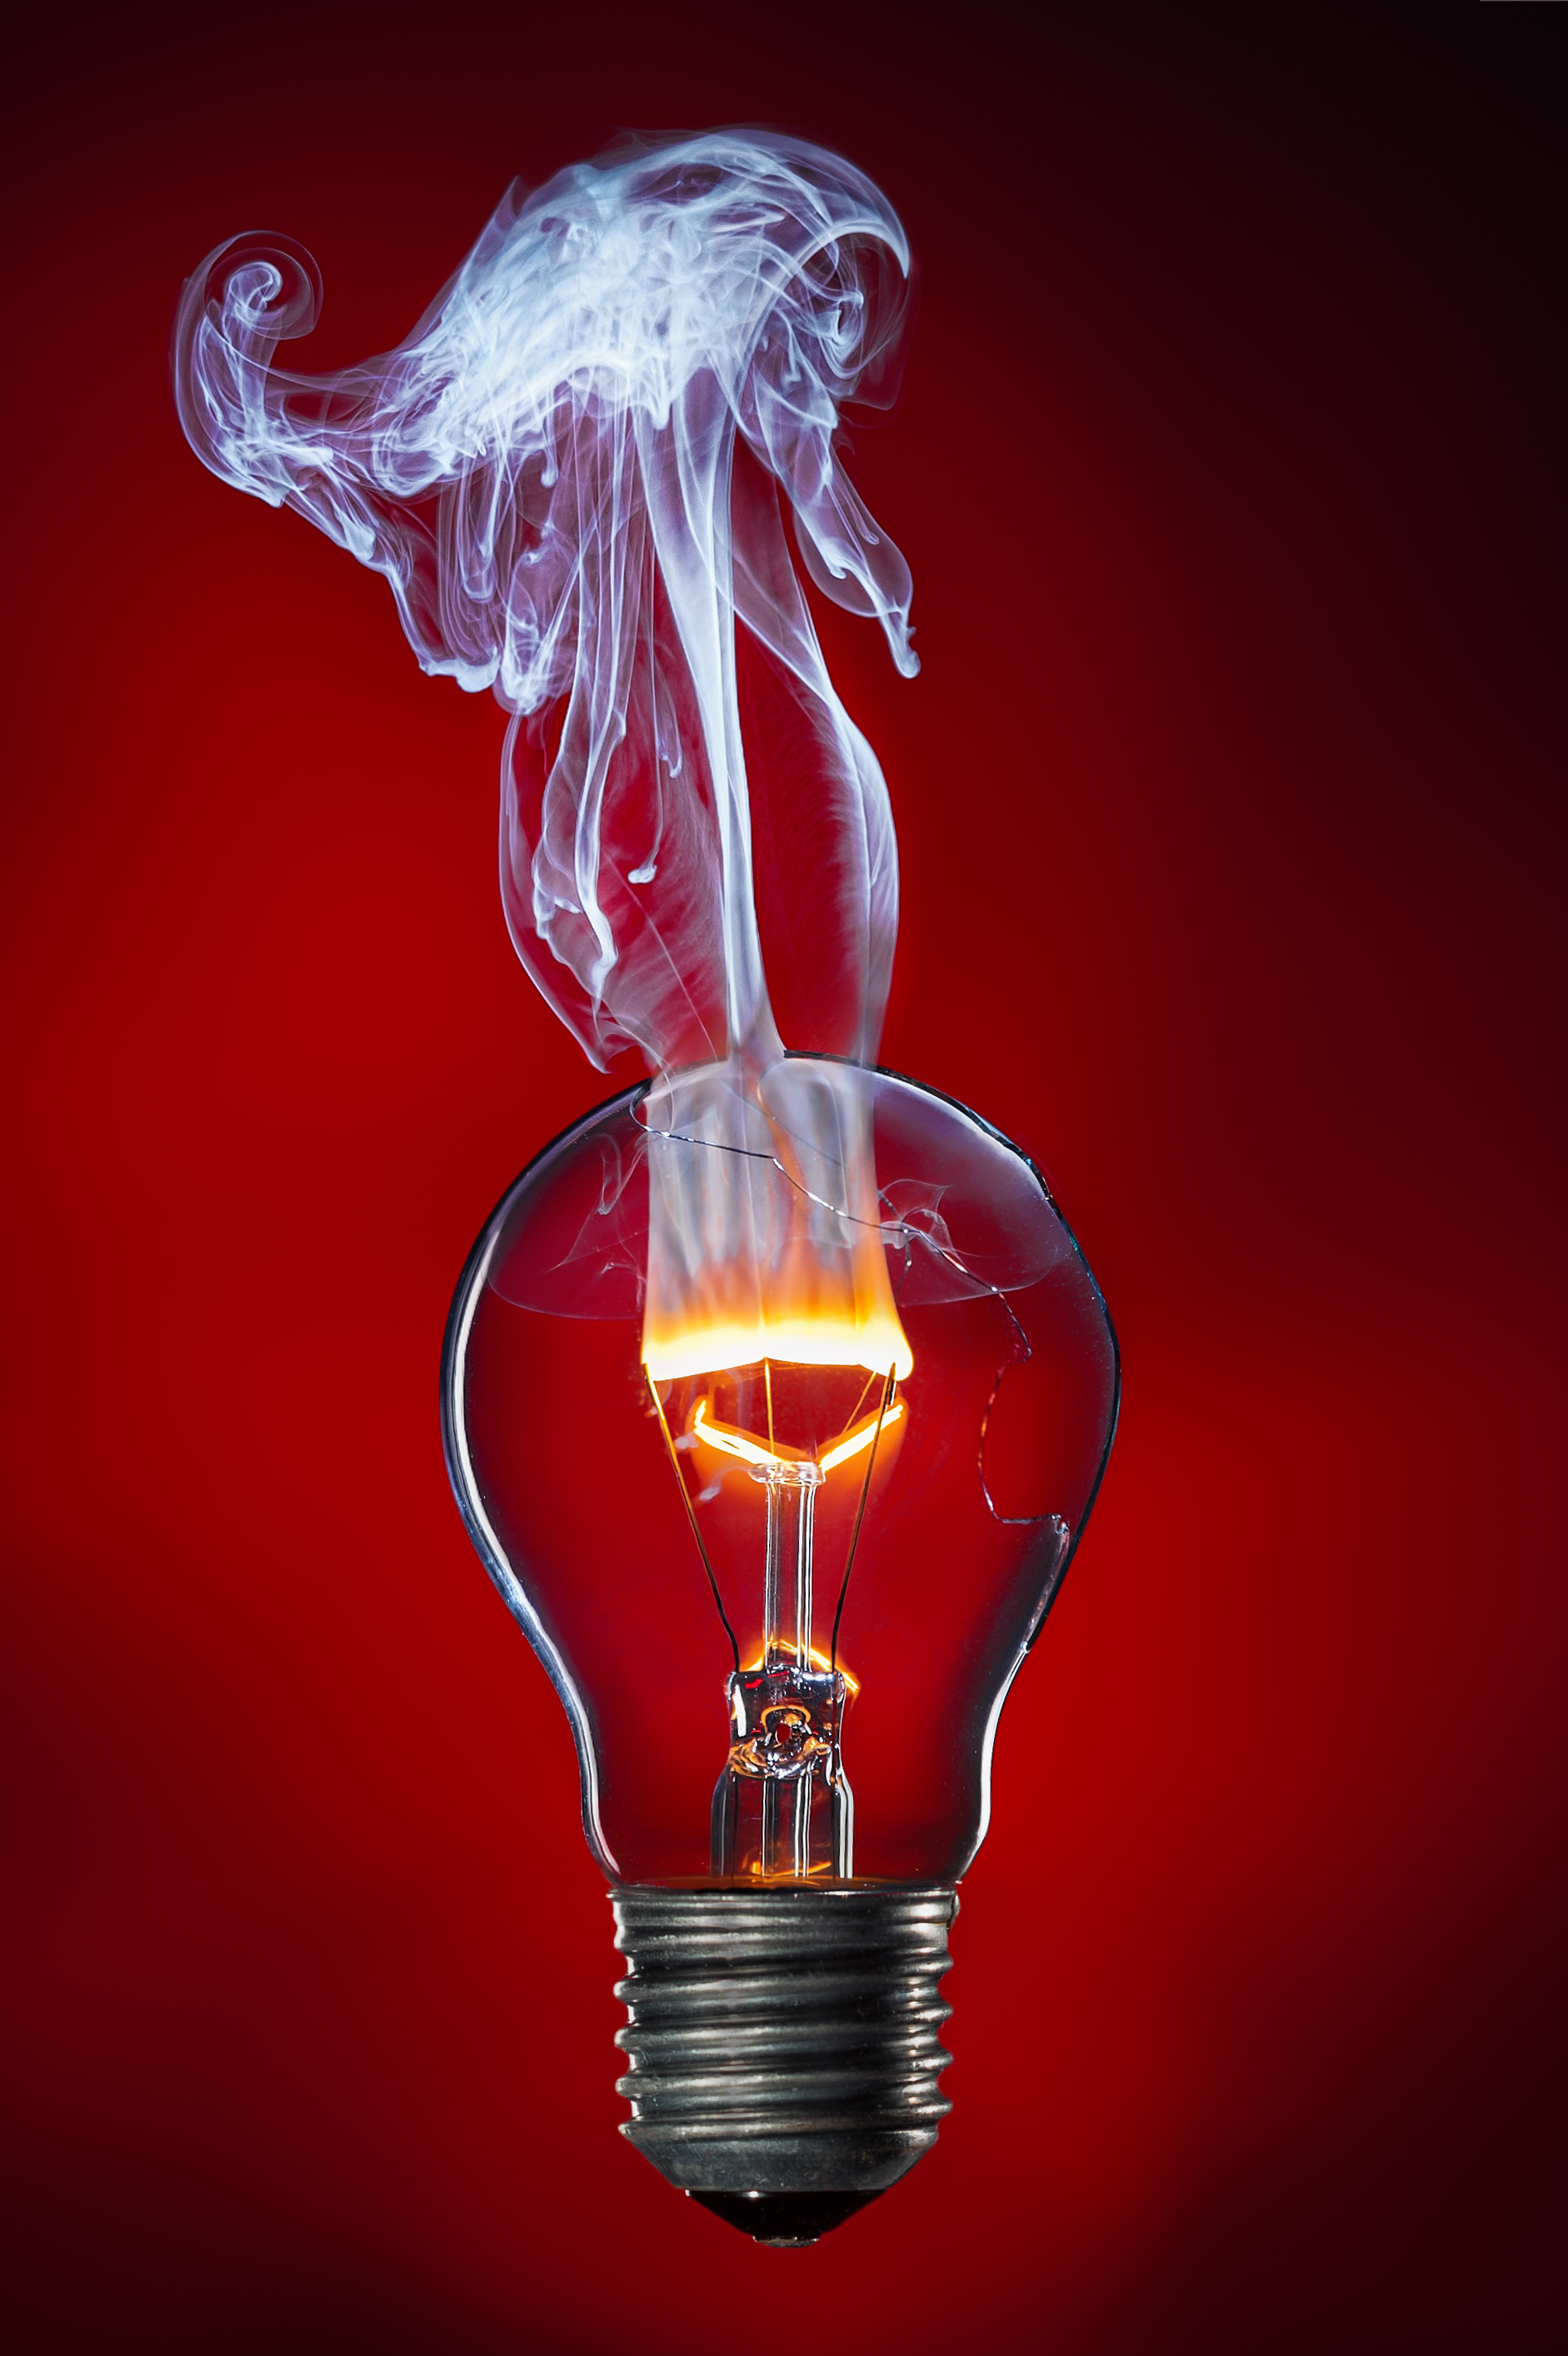 The tungsten filament burning with a flame in the light bulb.